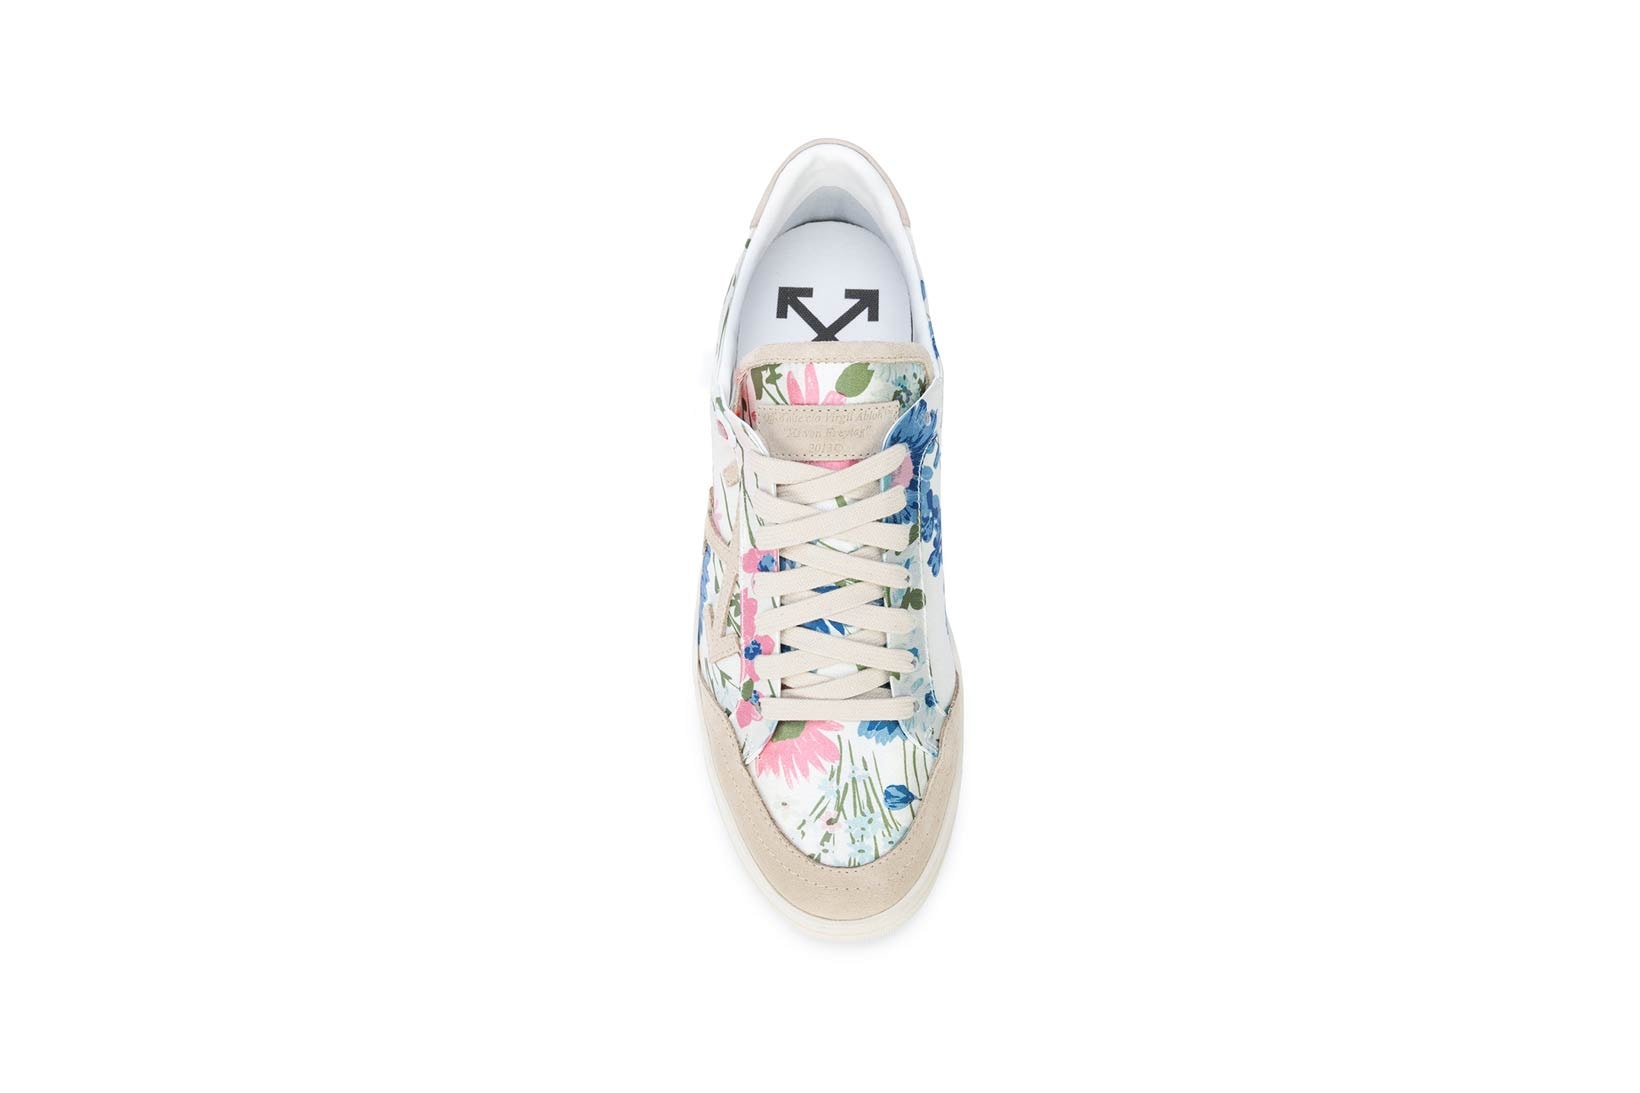 Off White Floral Low Top Sneaker Pink Blue